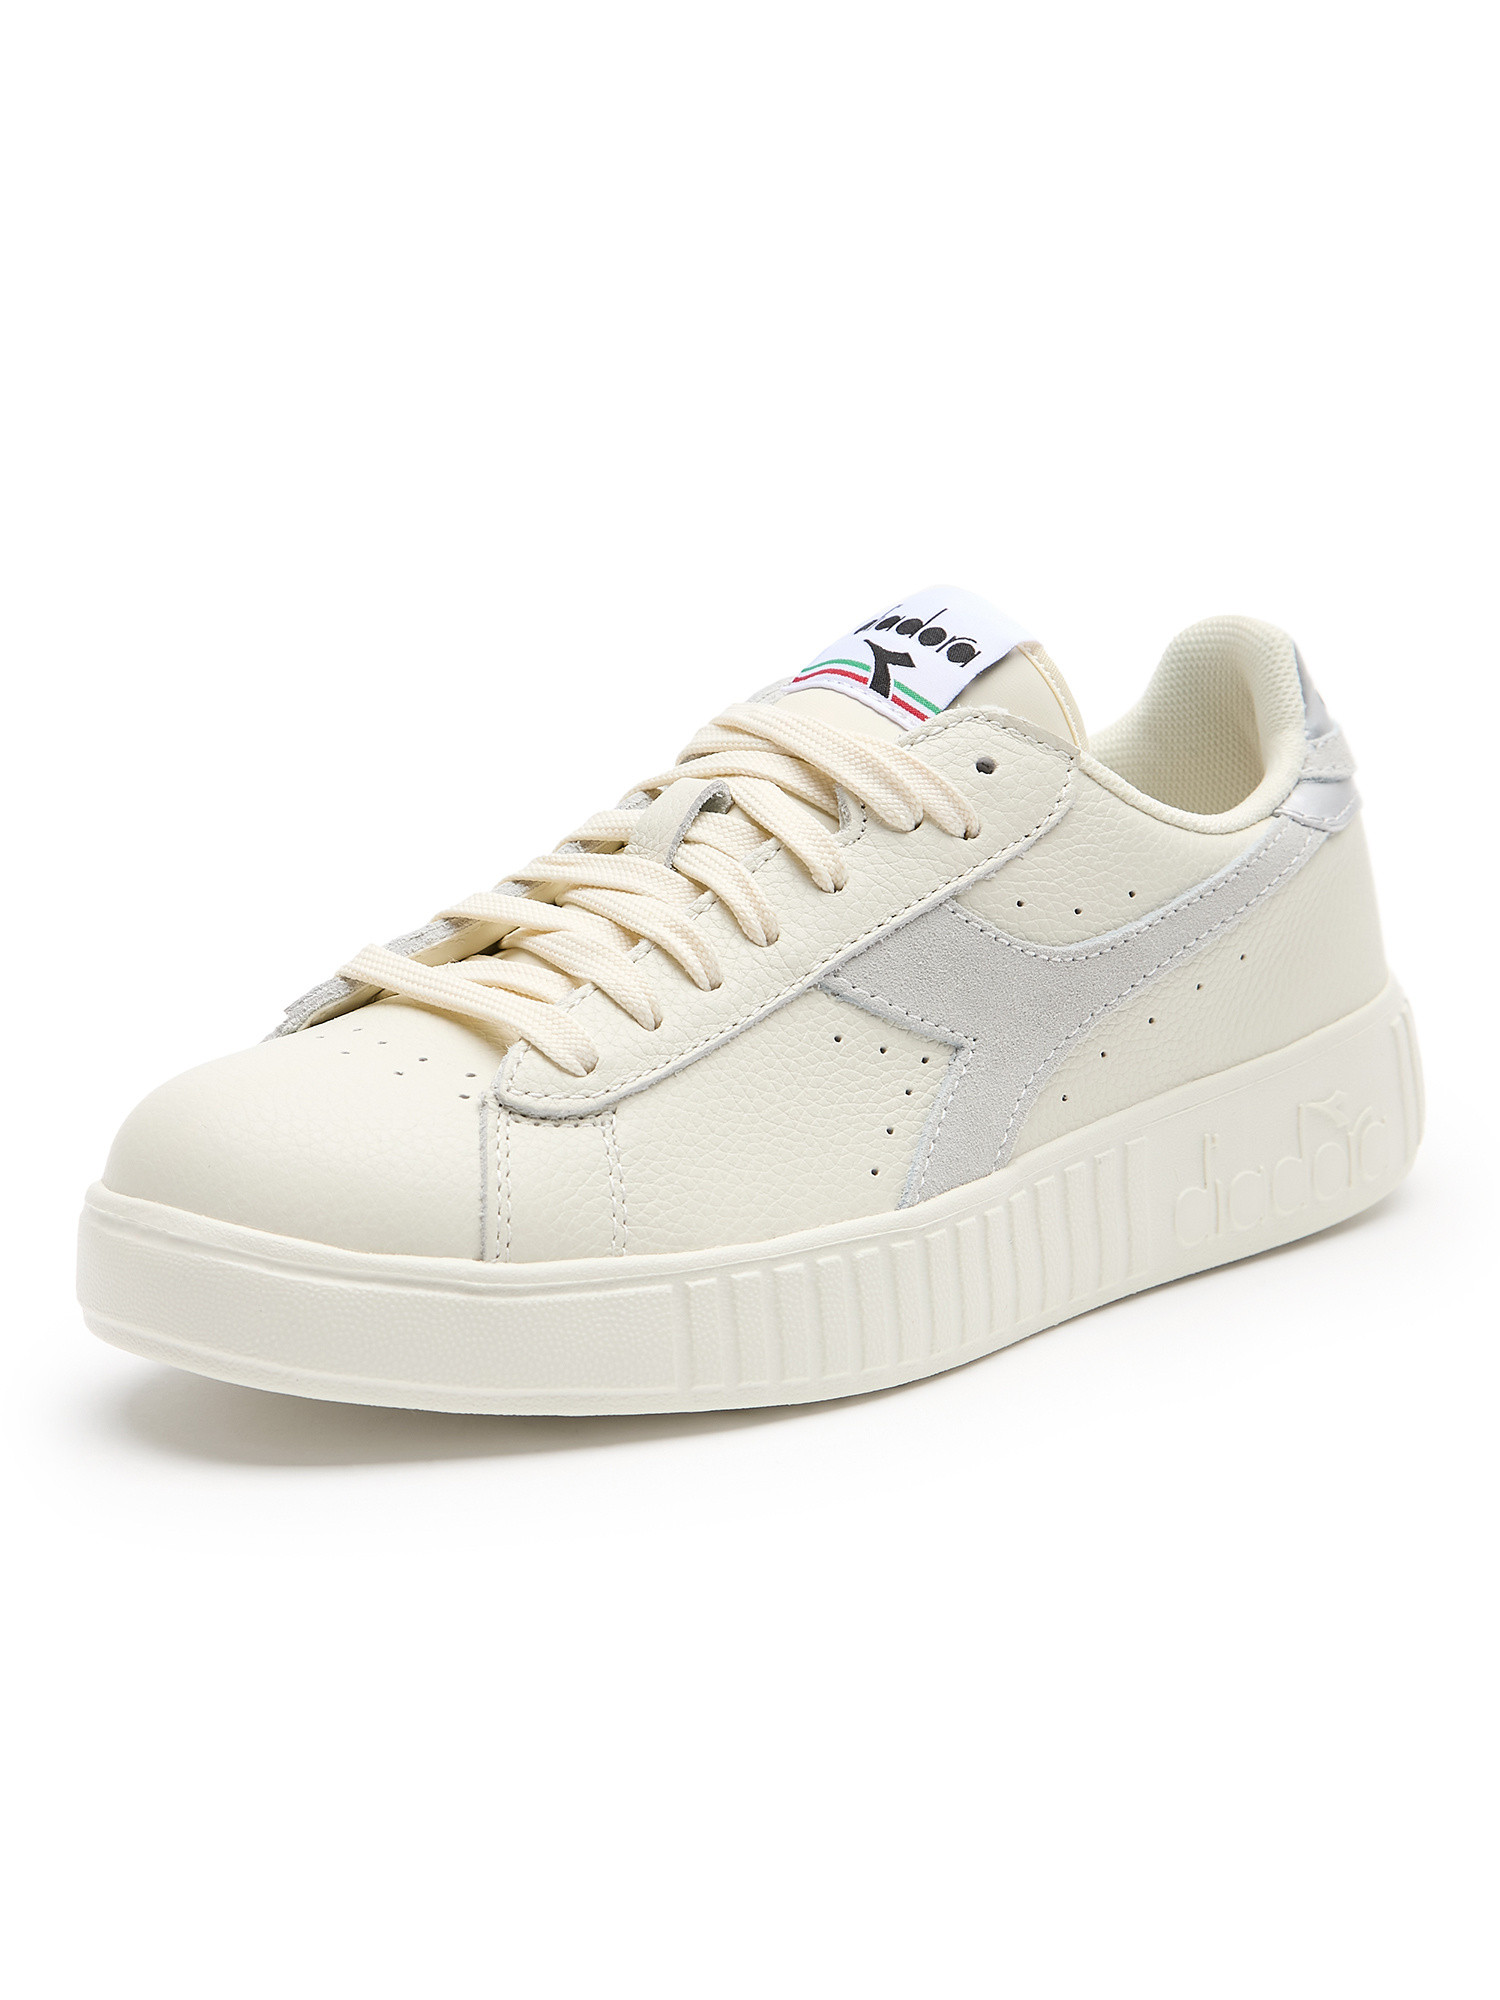 Diadora - Game Step Premium Tumbled Leather Shoes, White, large image number 2